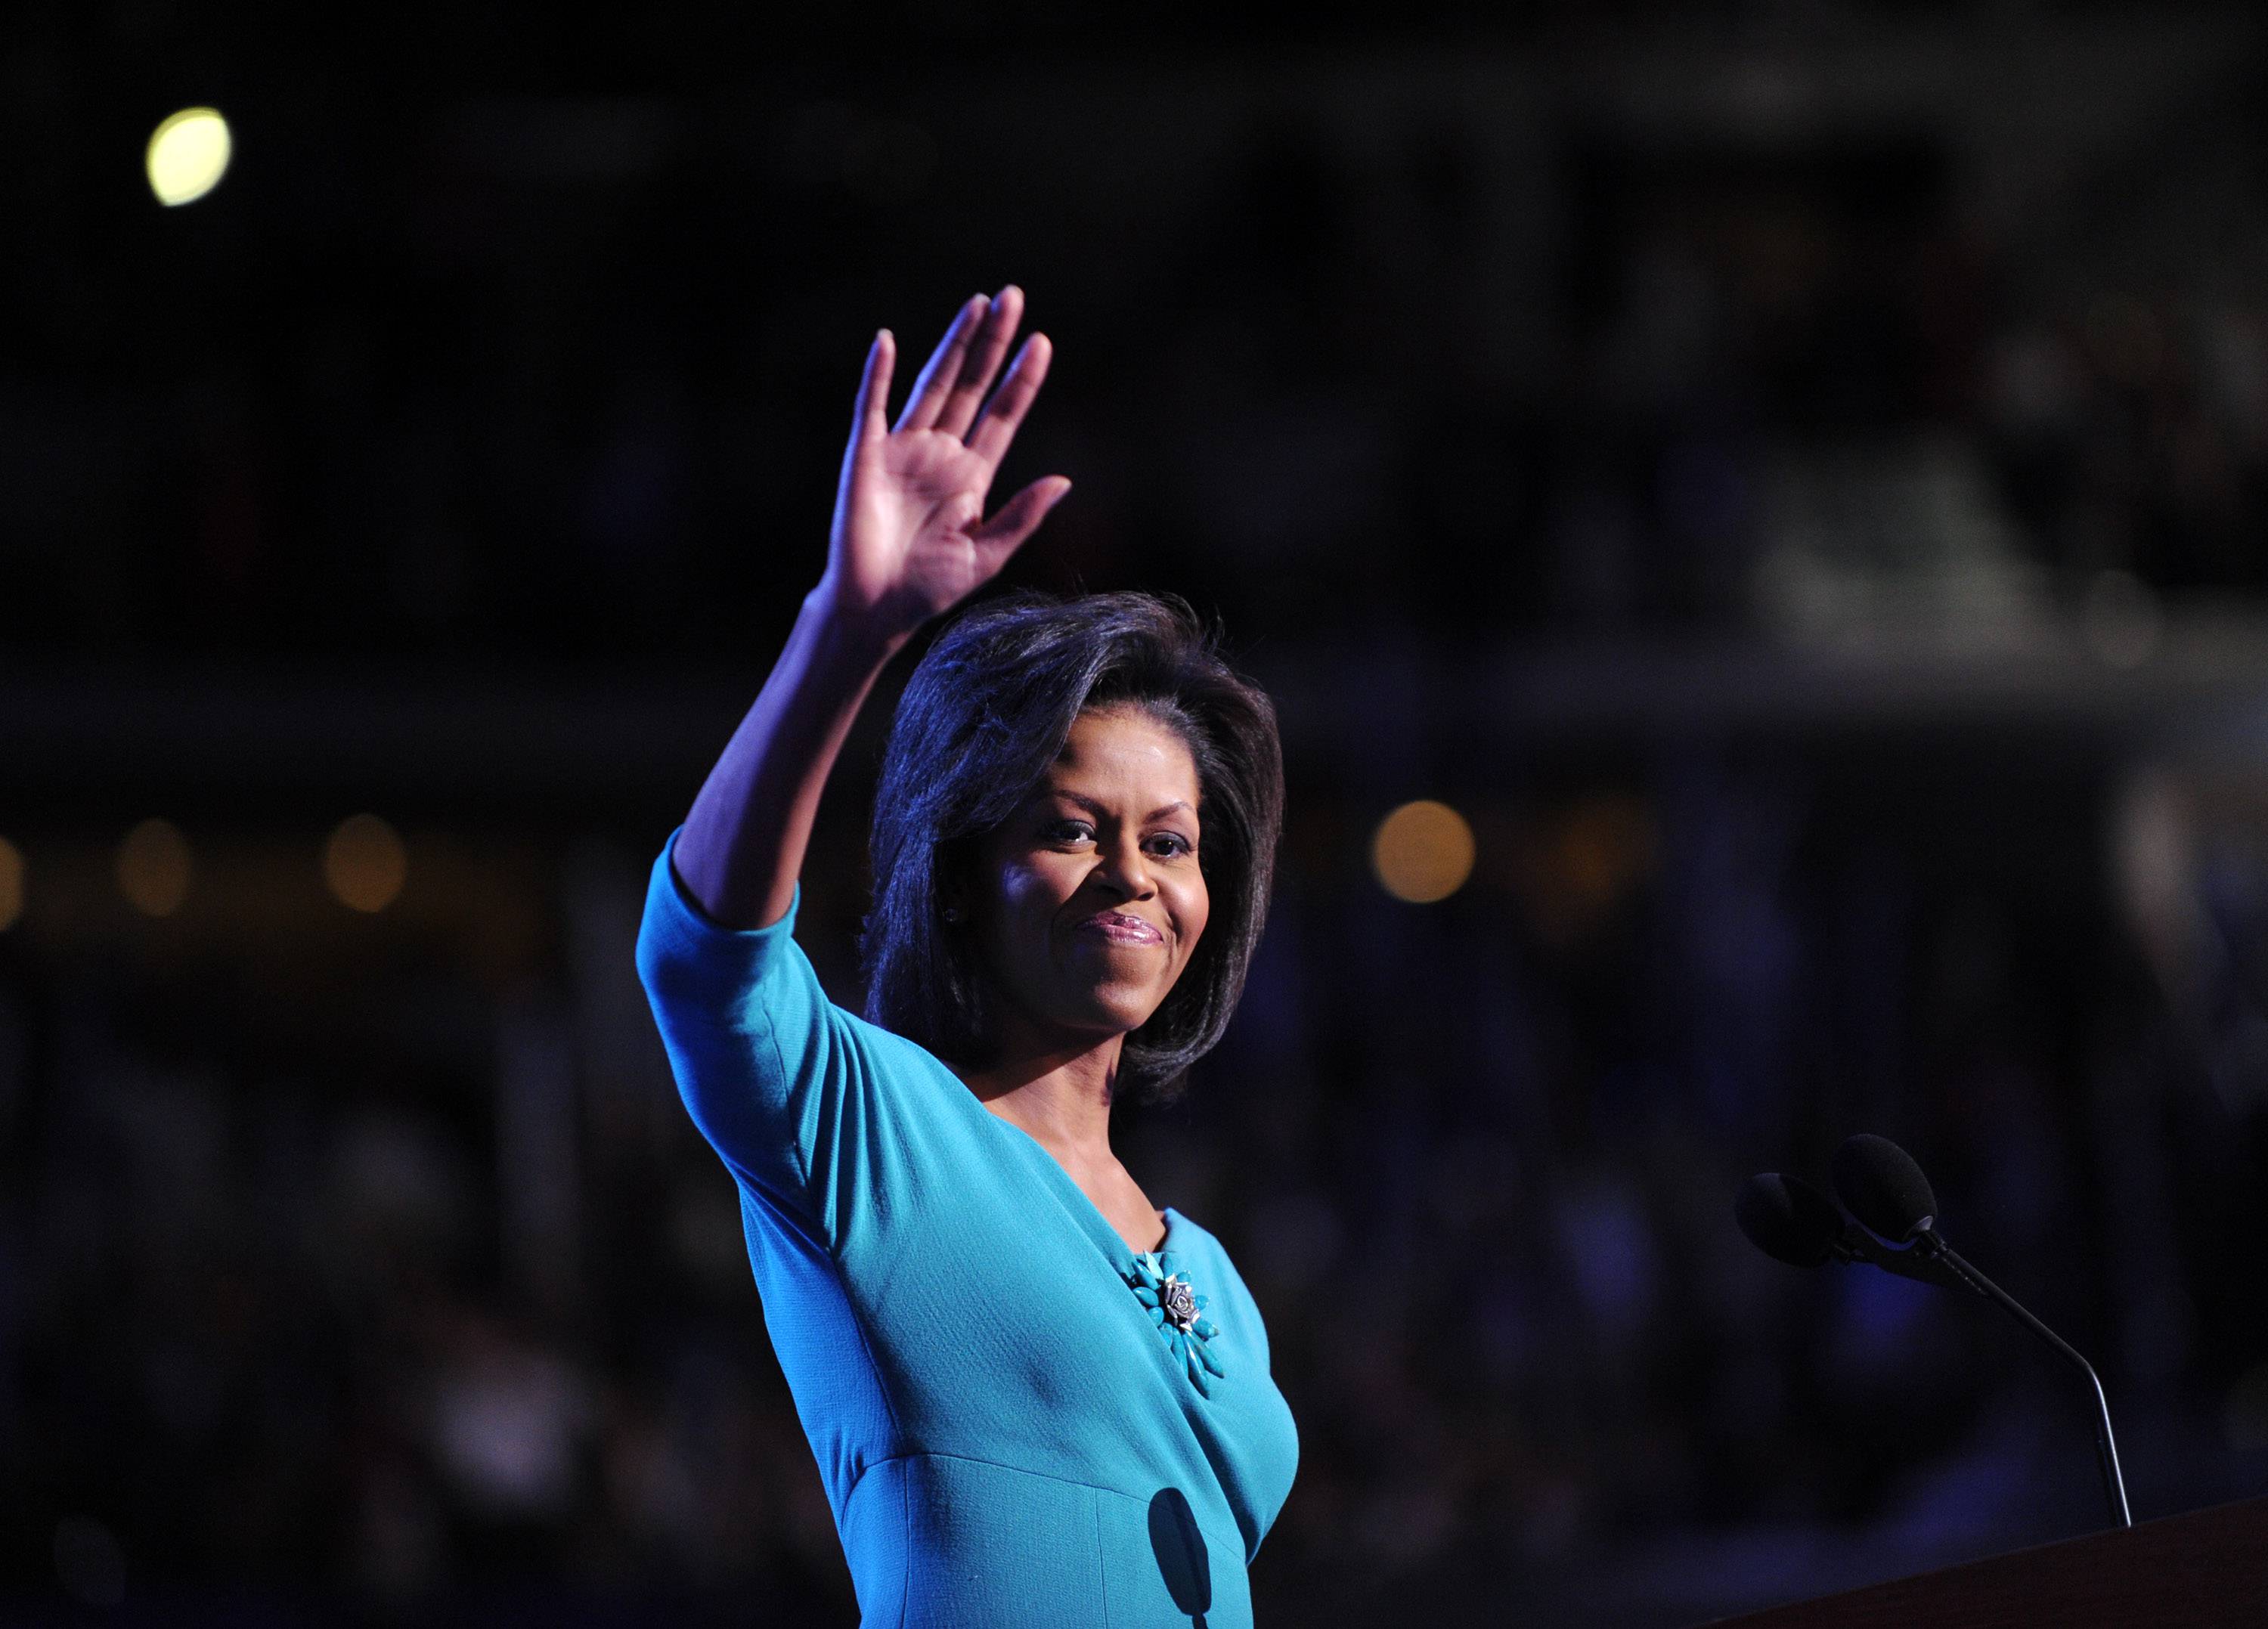 Michelle obama wallpaper - Quality and Resolution